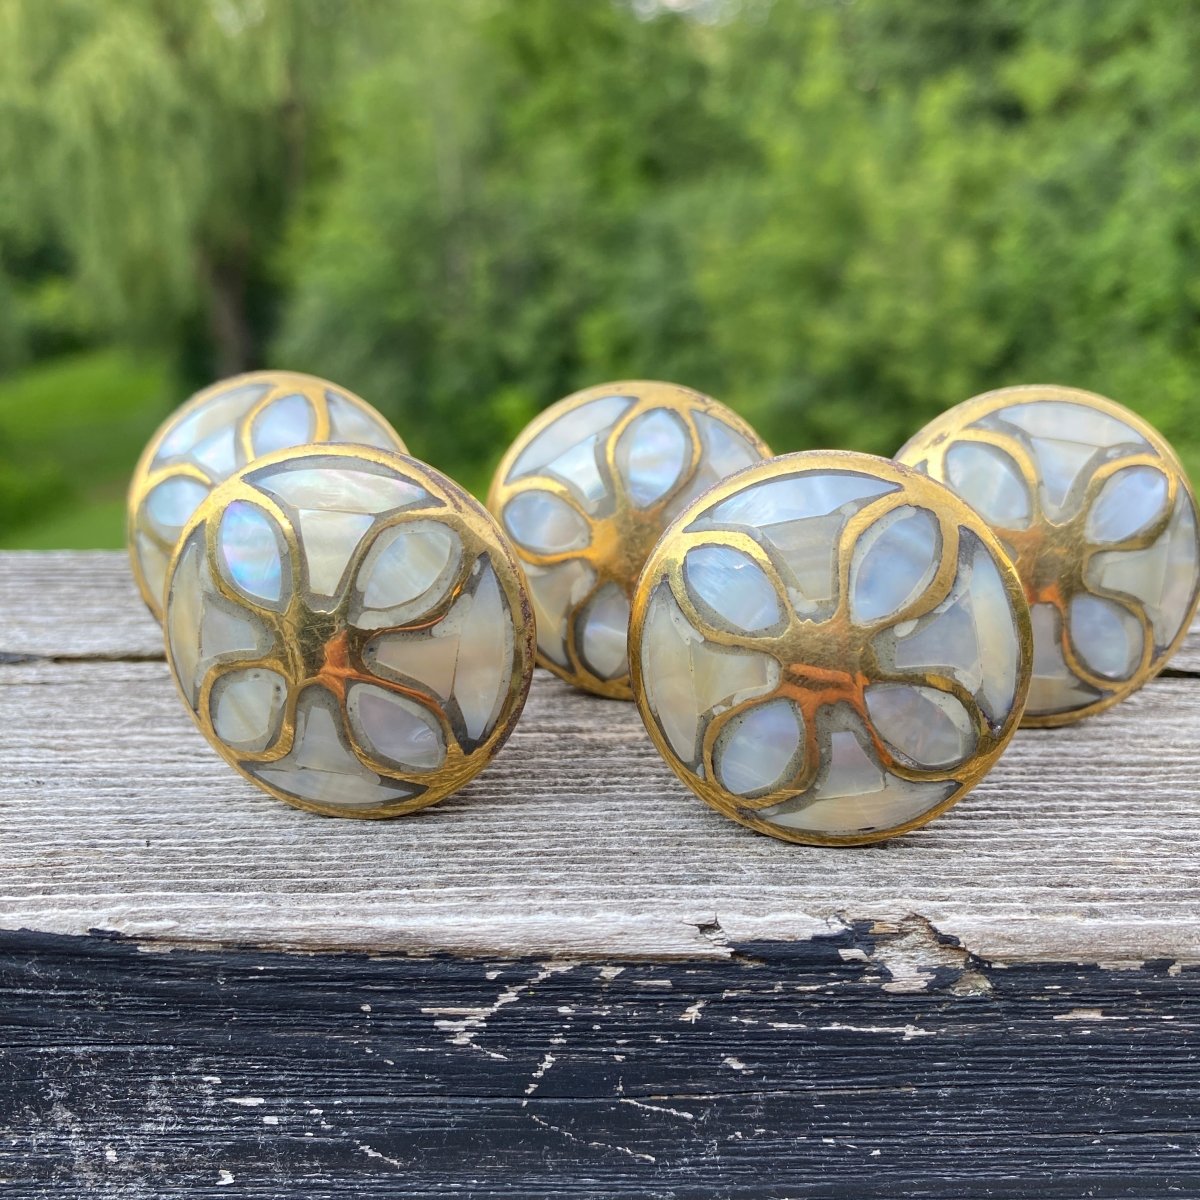 Mother of Pearl Drawer Cabinet Knobs wit Flower Pattern - DaRosa Creations